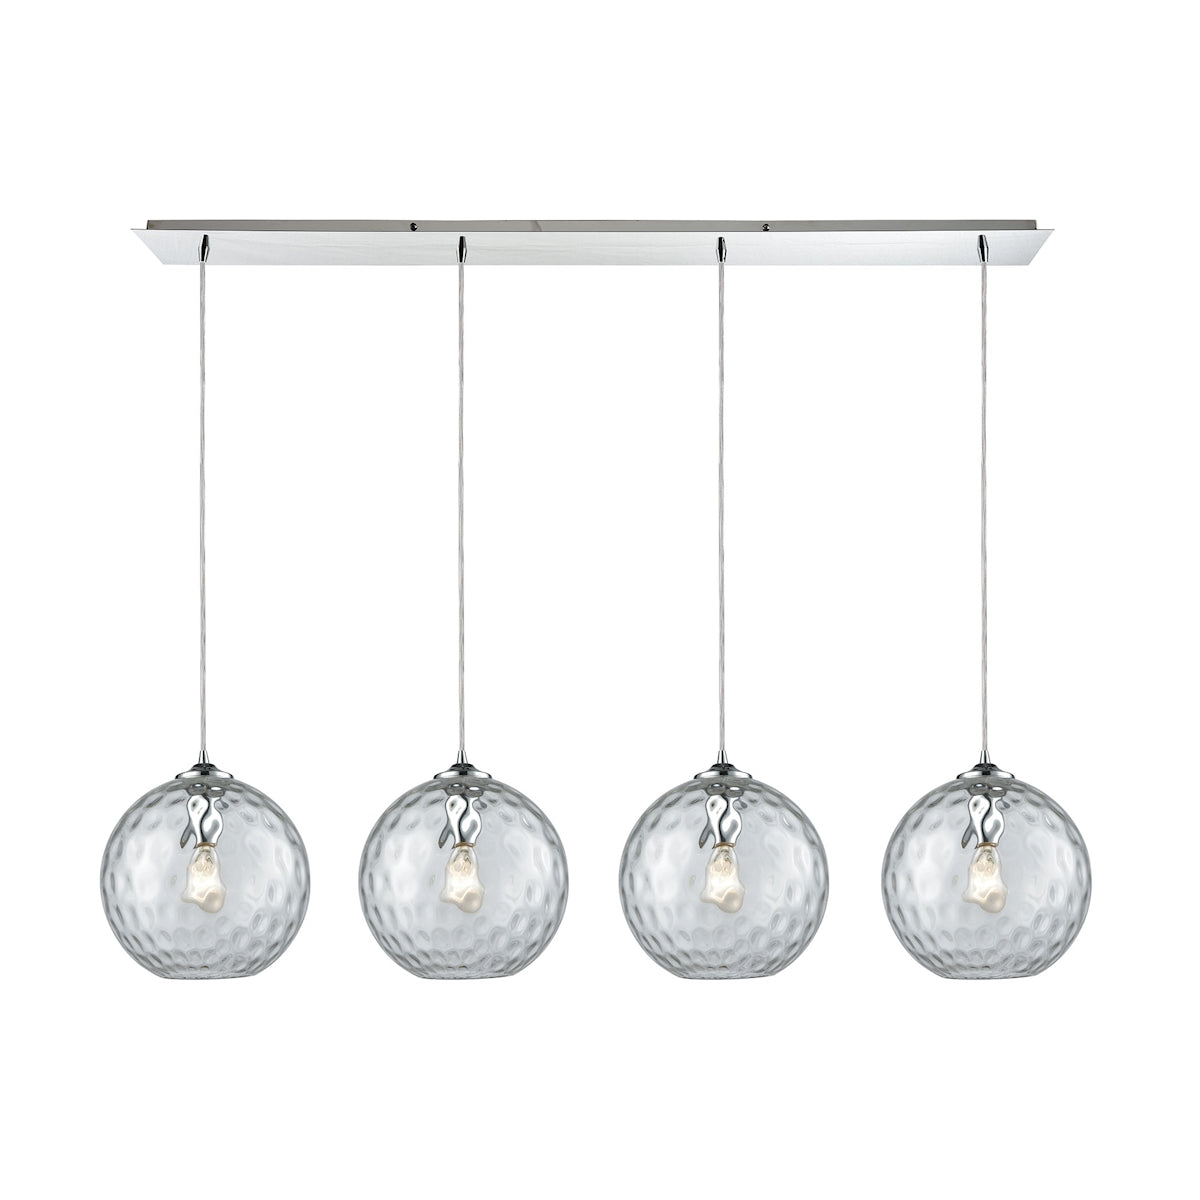 ELK Lighting 31380/4LP-CLR Watersphere 4-Light Linear Pendant Fixture in Chrome with Hammered Clear Glass